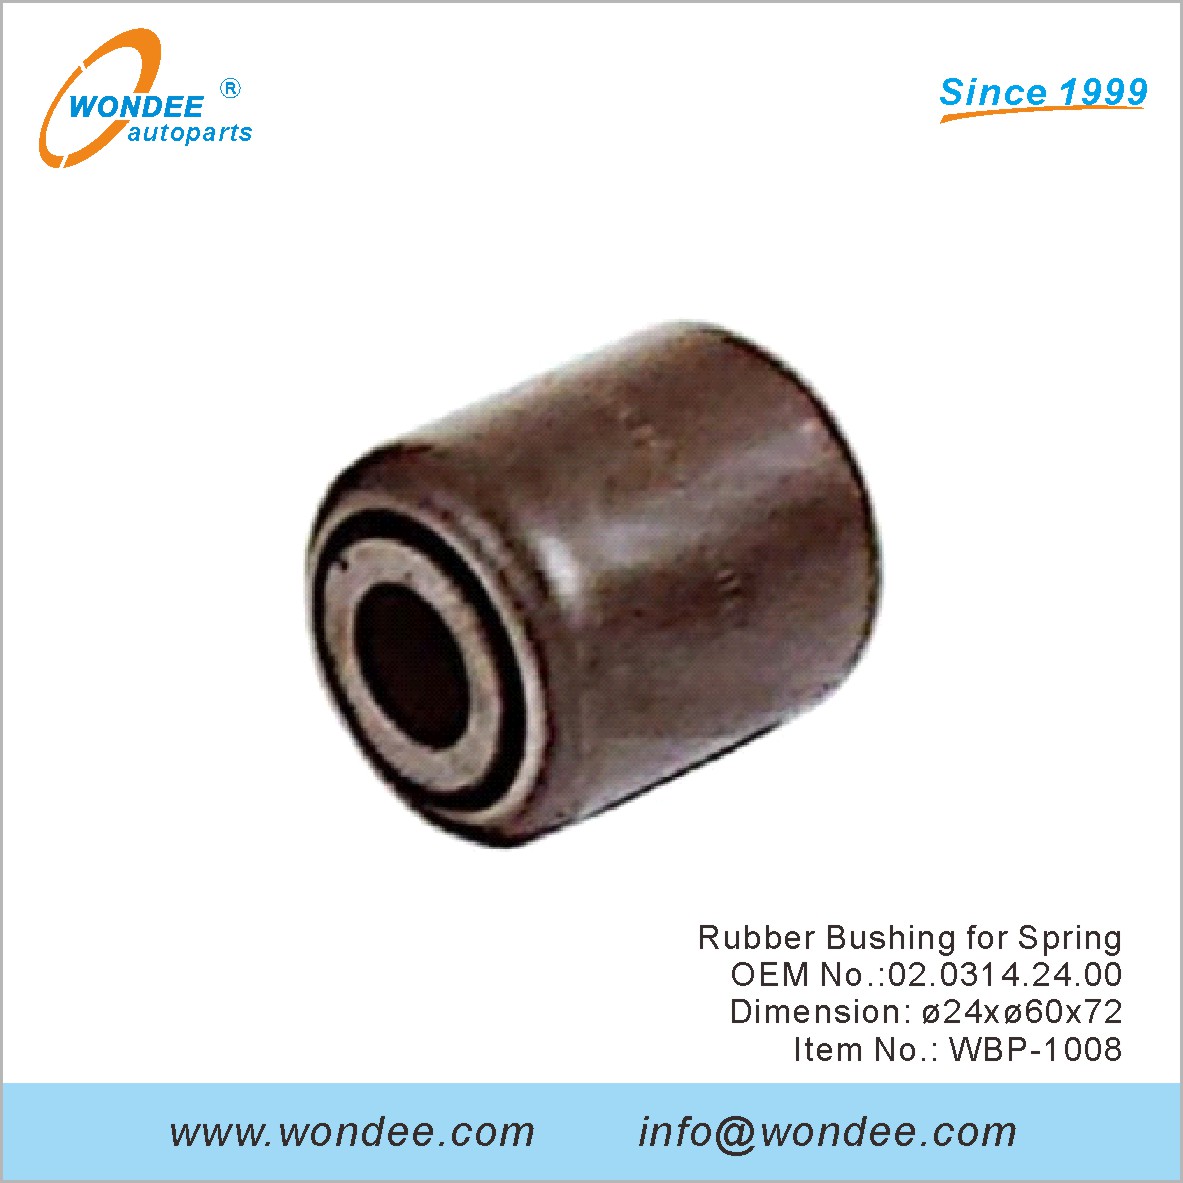 Rubber Bushing for Spring OEM 0203142400 for BPW from WONDEE